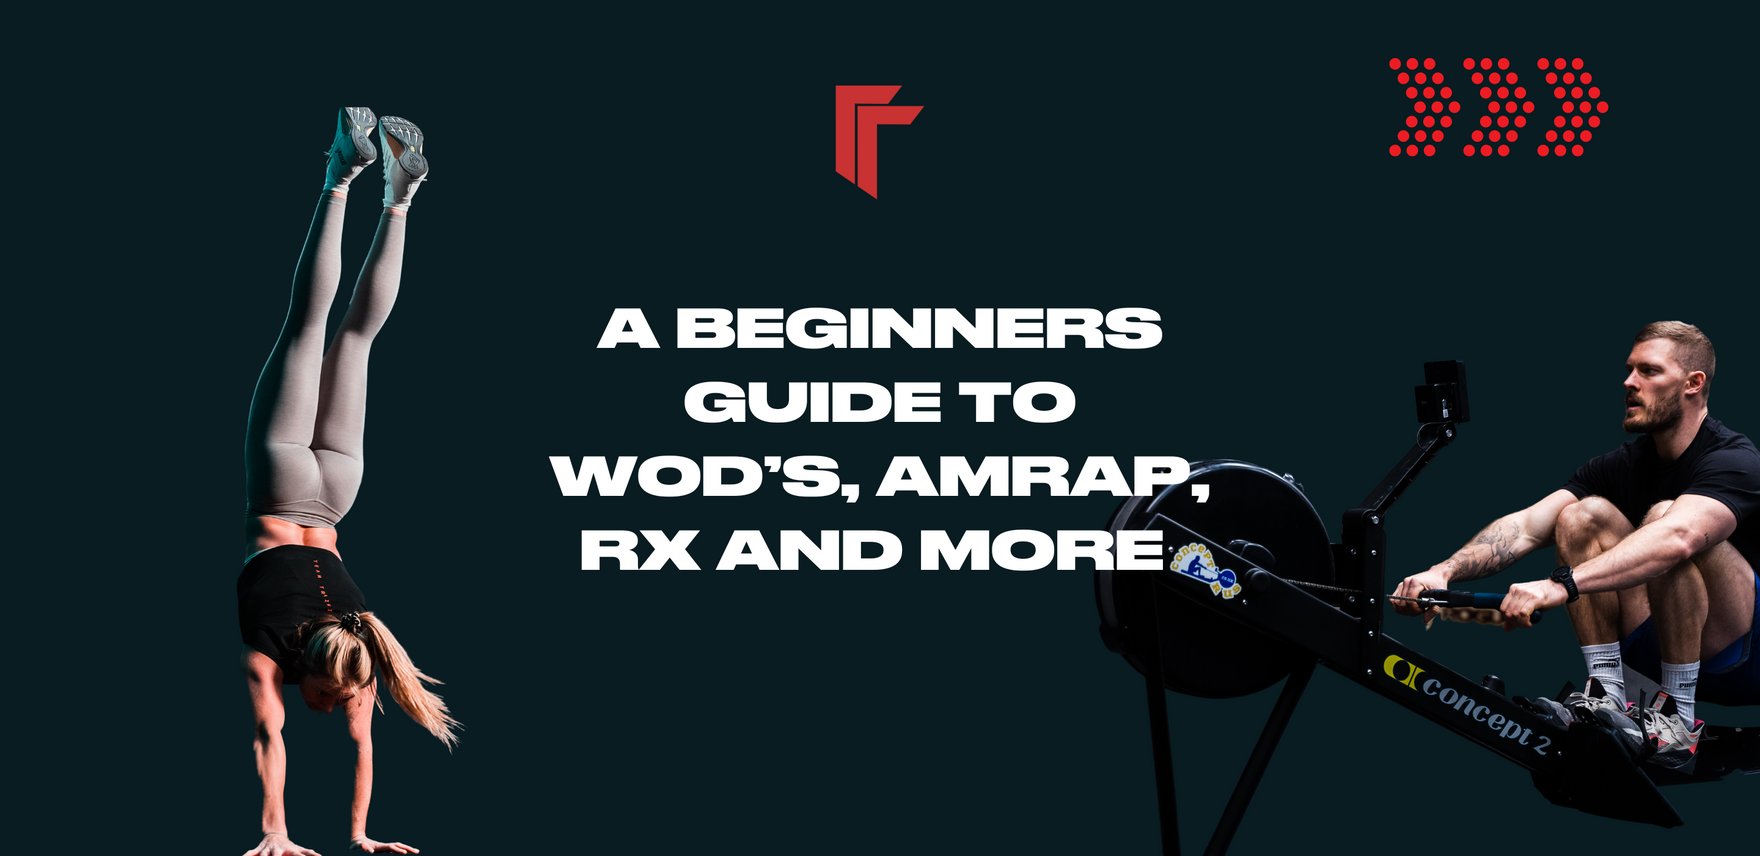 Get with the Lingo - A Beginners Guide to WOD’s, AMRAP, RX and More